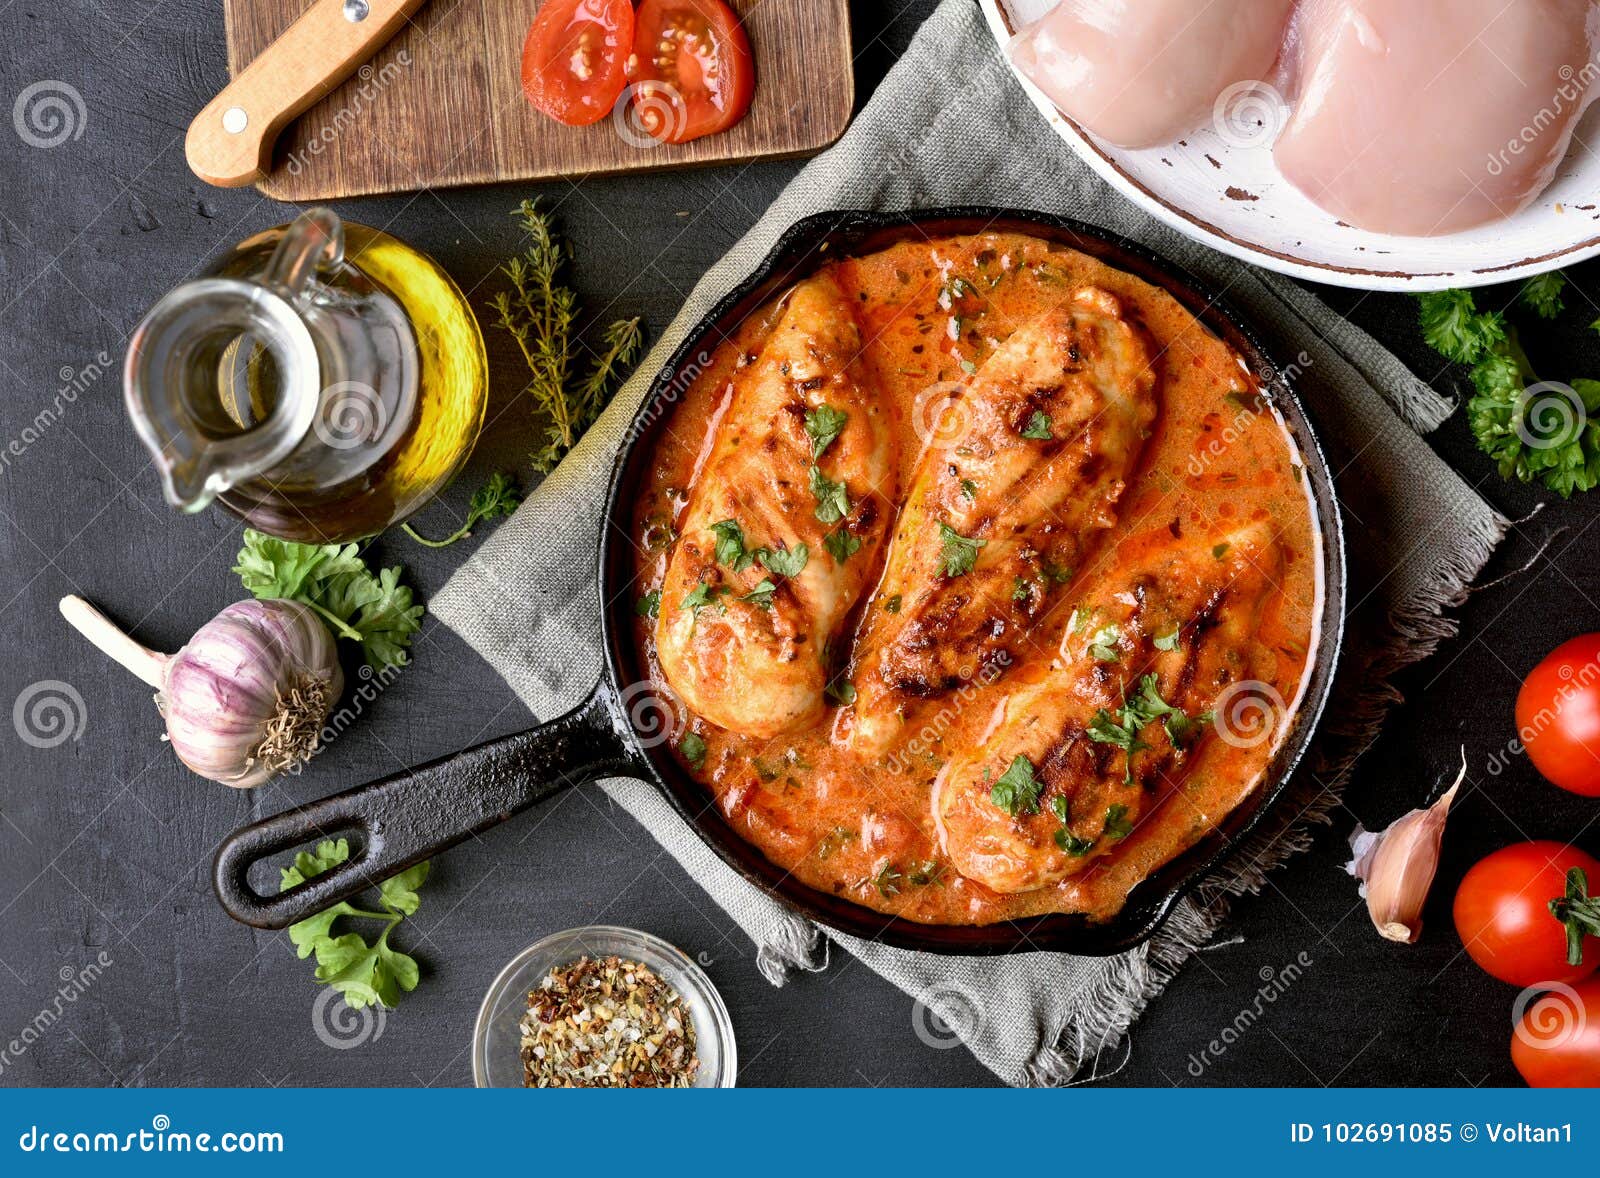 cooked chicken breast with tomato sauce